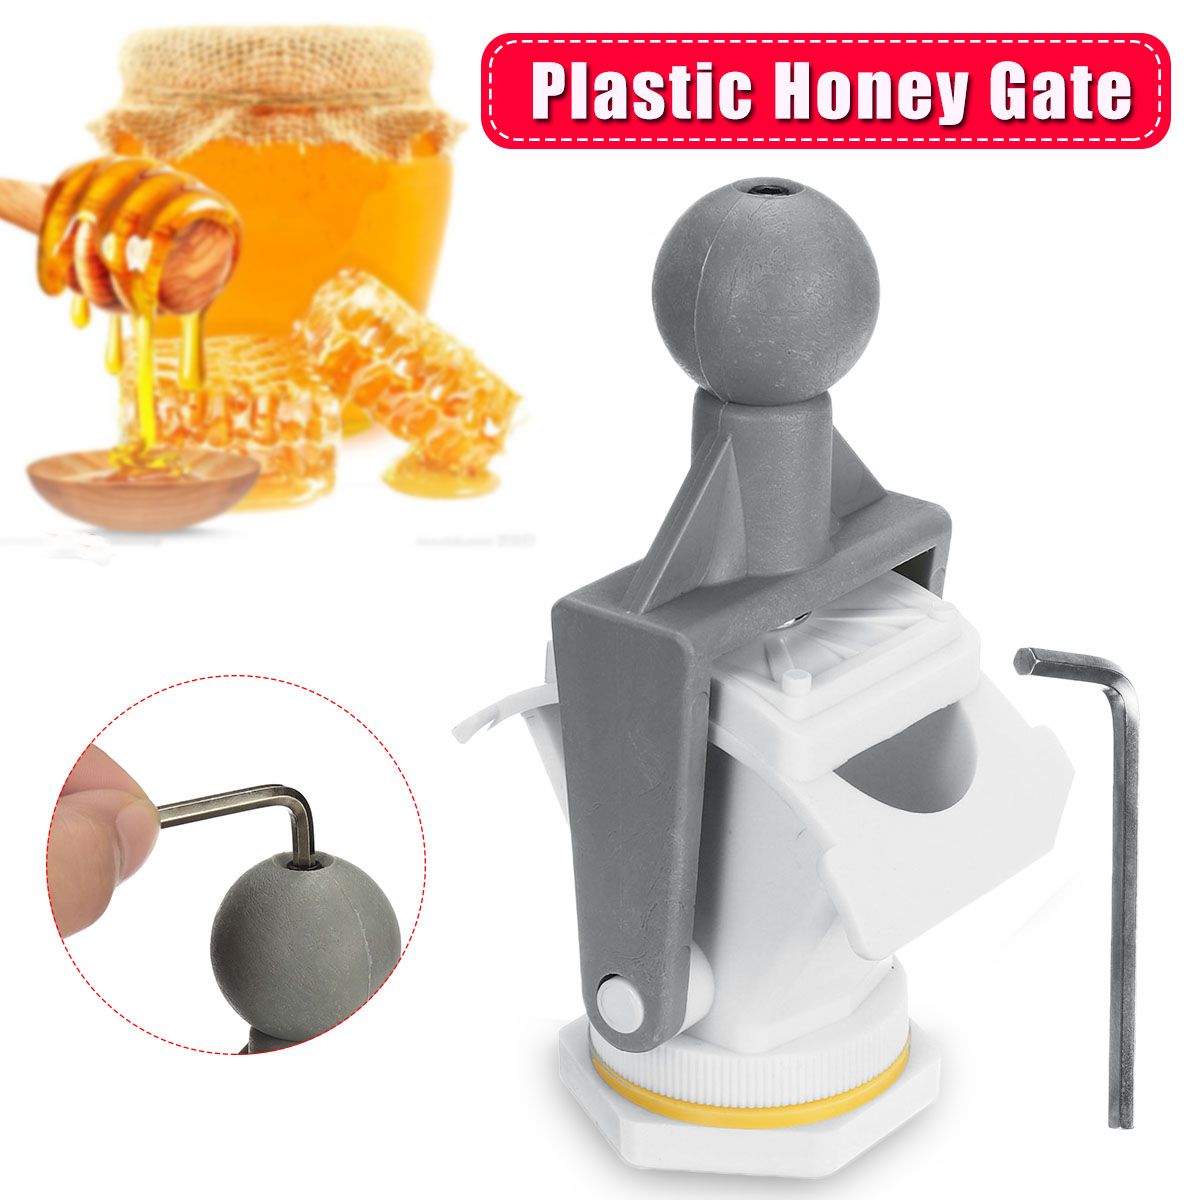 Plastic-Honey-Gate-Valve-Beekeeping-Tool-Extractor-Honey-Tap-Equipment-with-Wrench-1656477